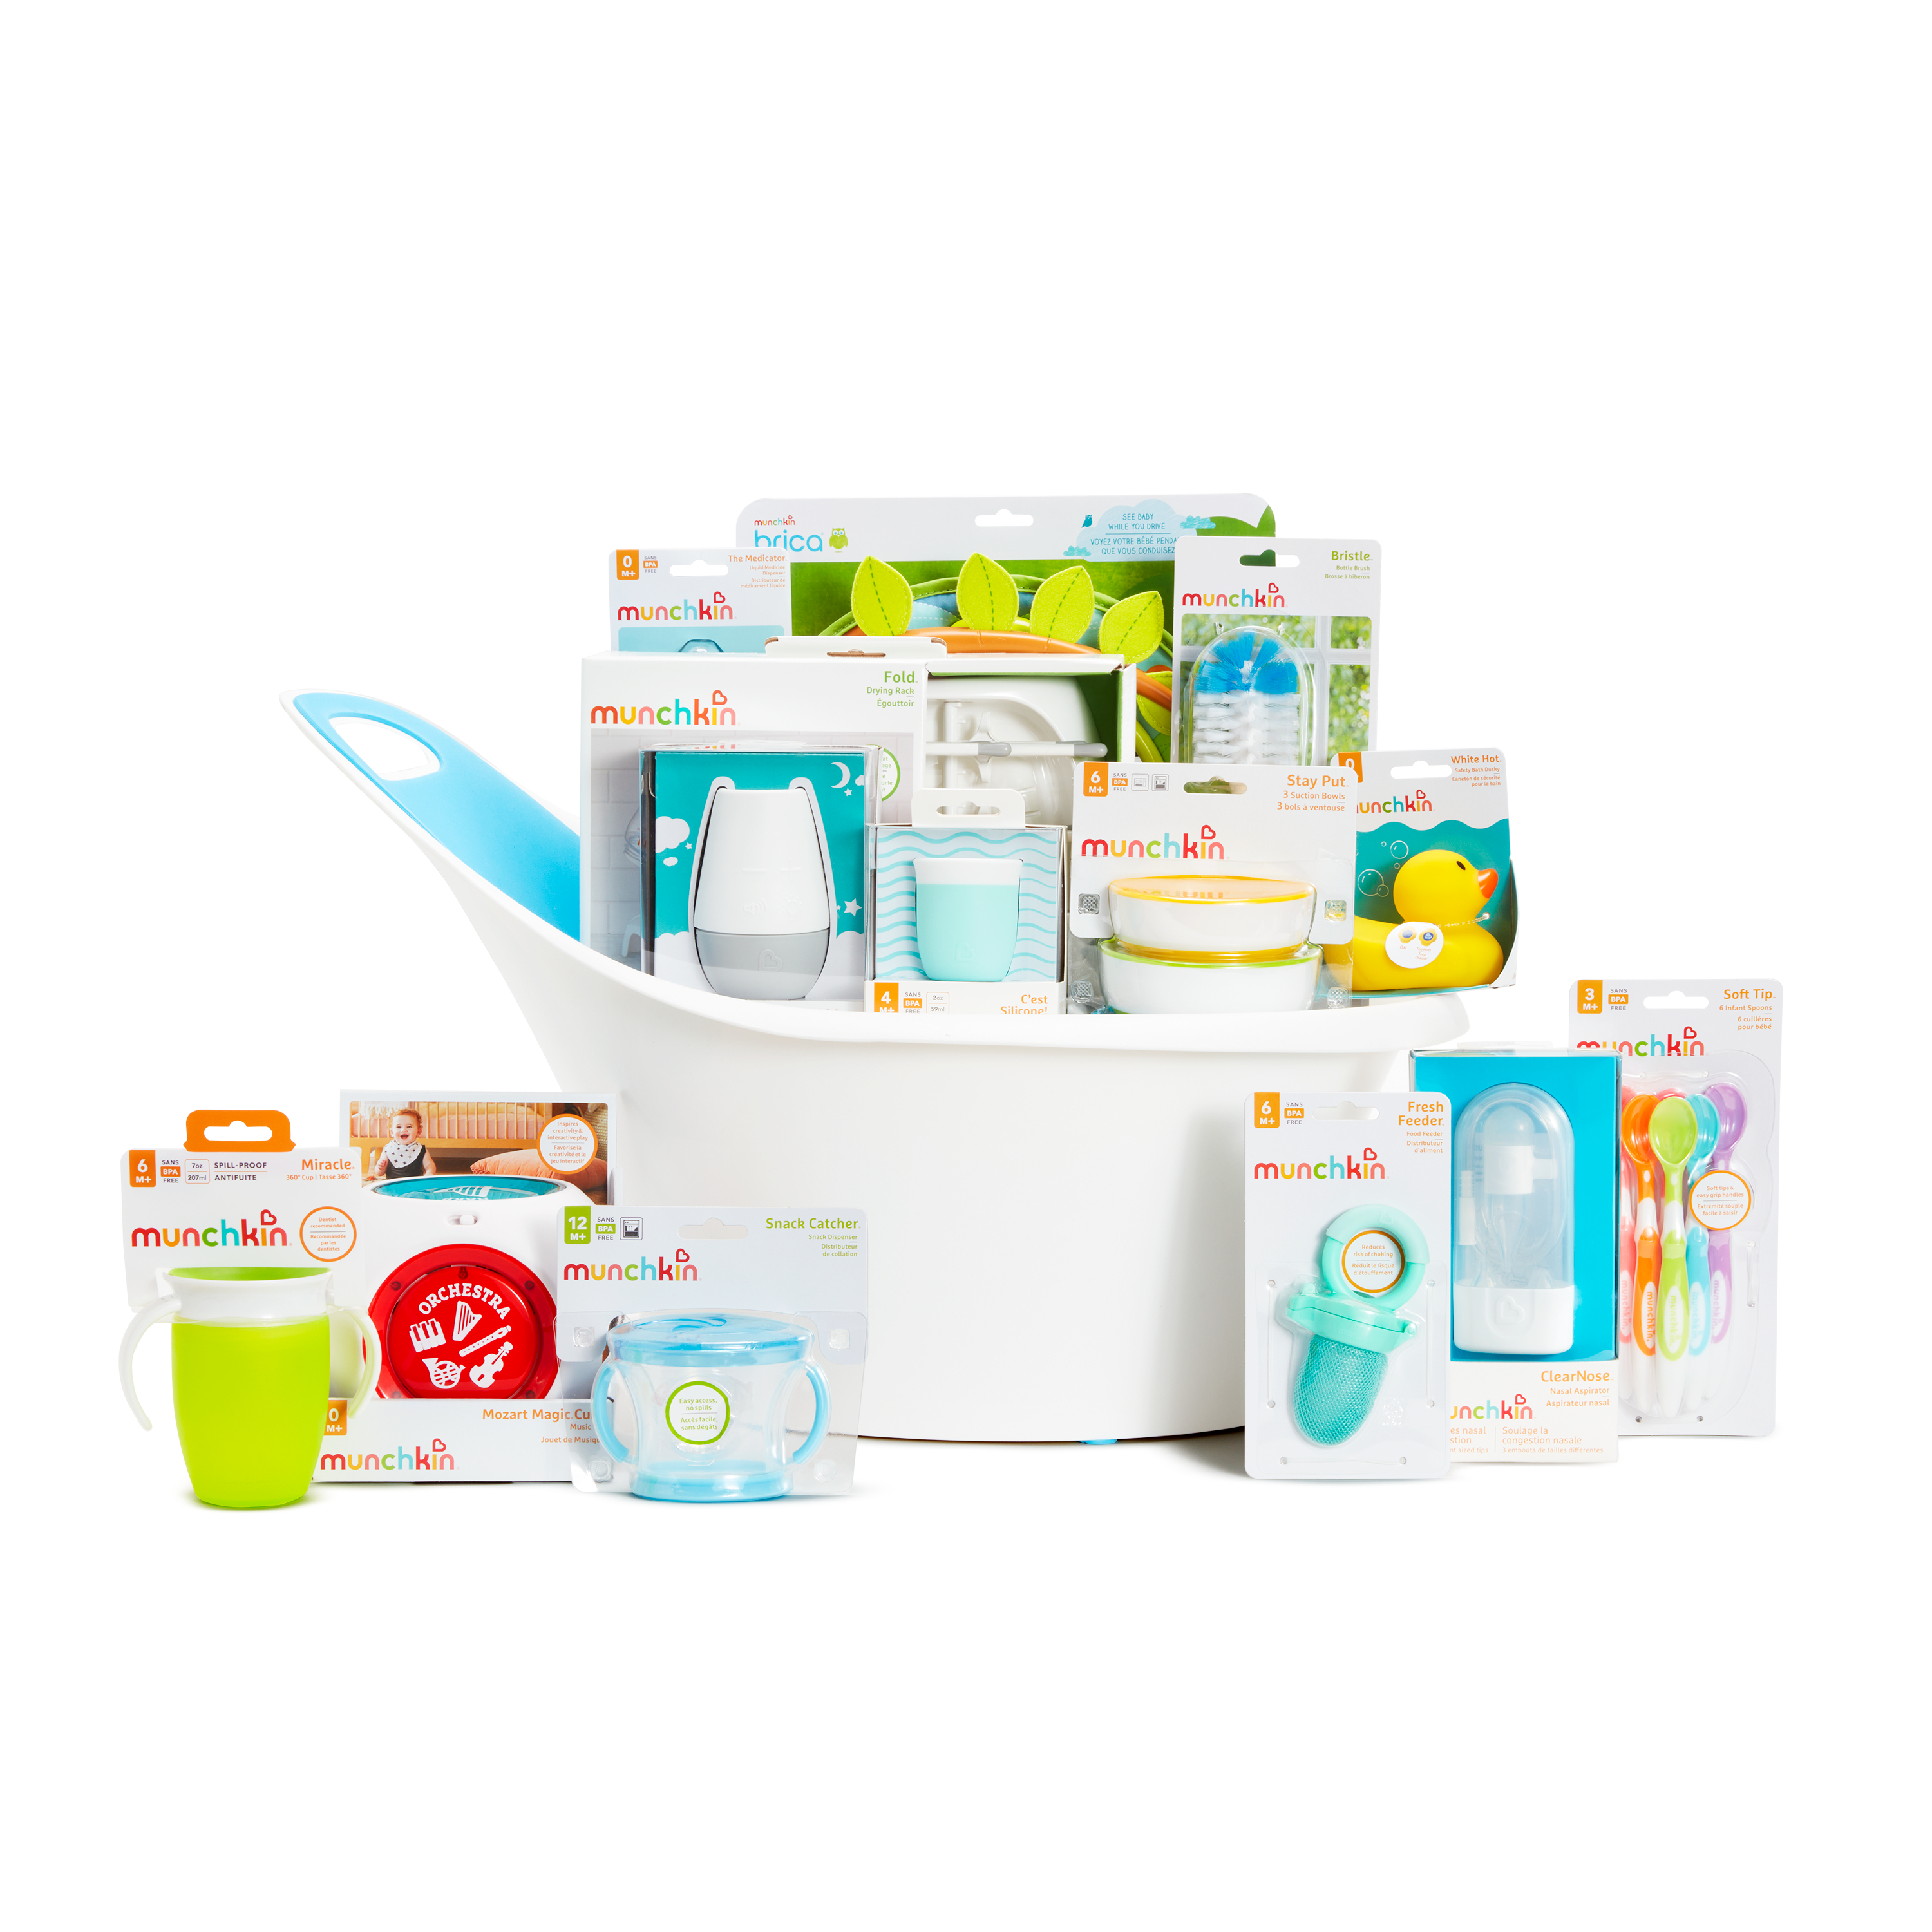 Munchkin® My Munchkin Gift Basket, Great for Baby Showers, Includes 15 Baby Products, Neutral, Unisex - image 1 of 30